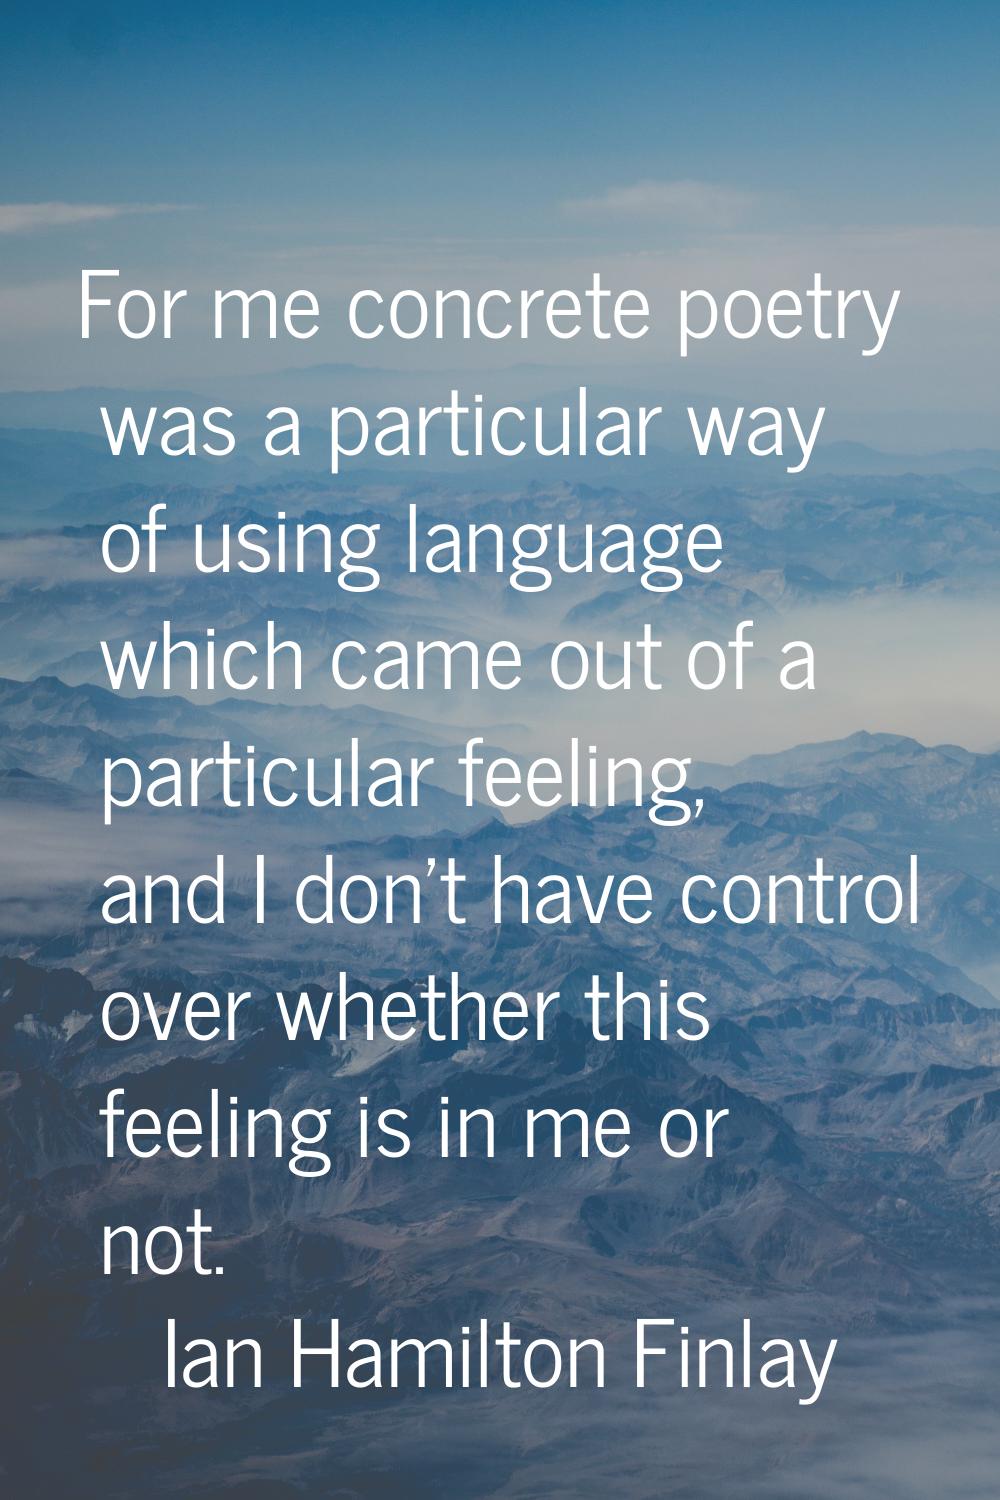 For me concrete poetry was a particular way of using language which came out of a particular feelin